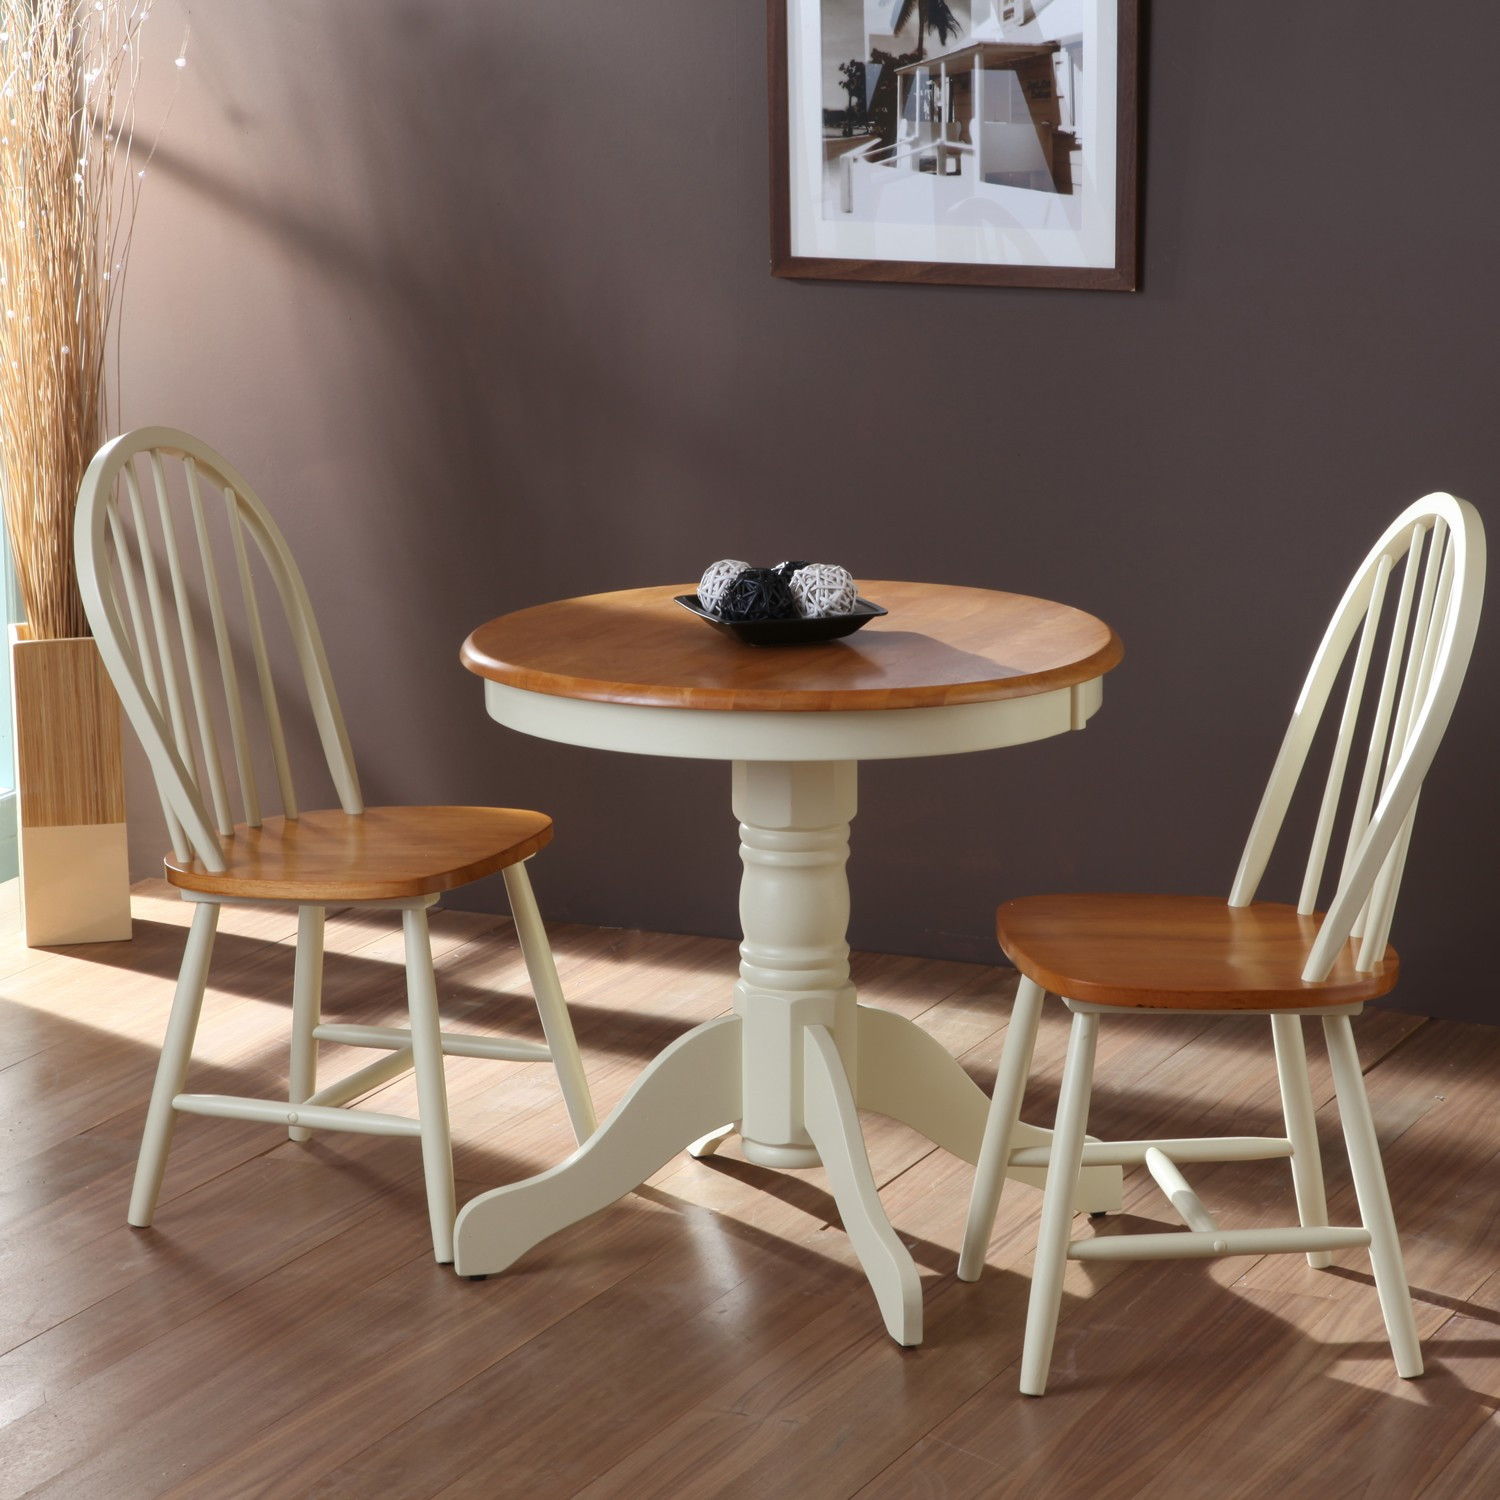 Small Kitchen Chairs
 Beautiful White Round Kitchen Table and Chairs